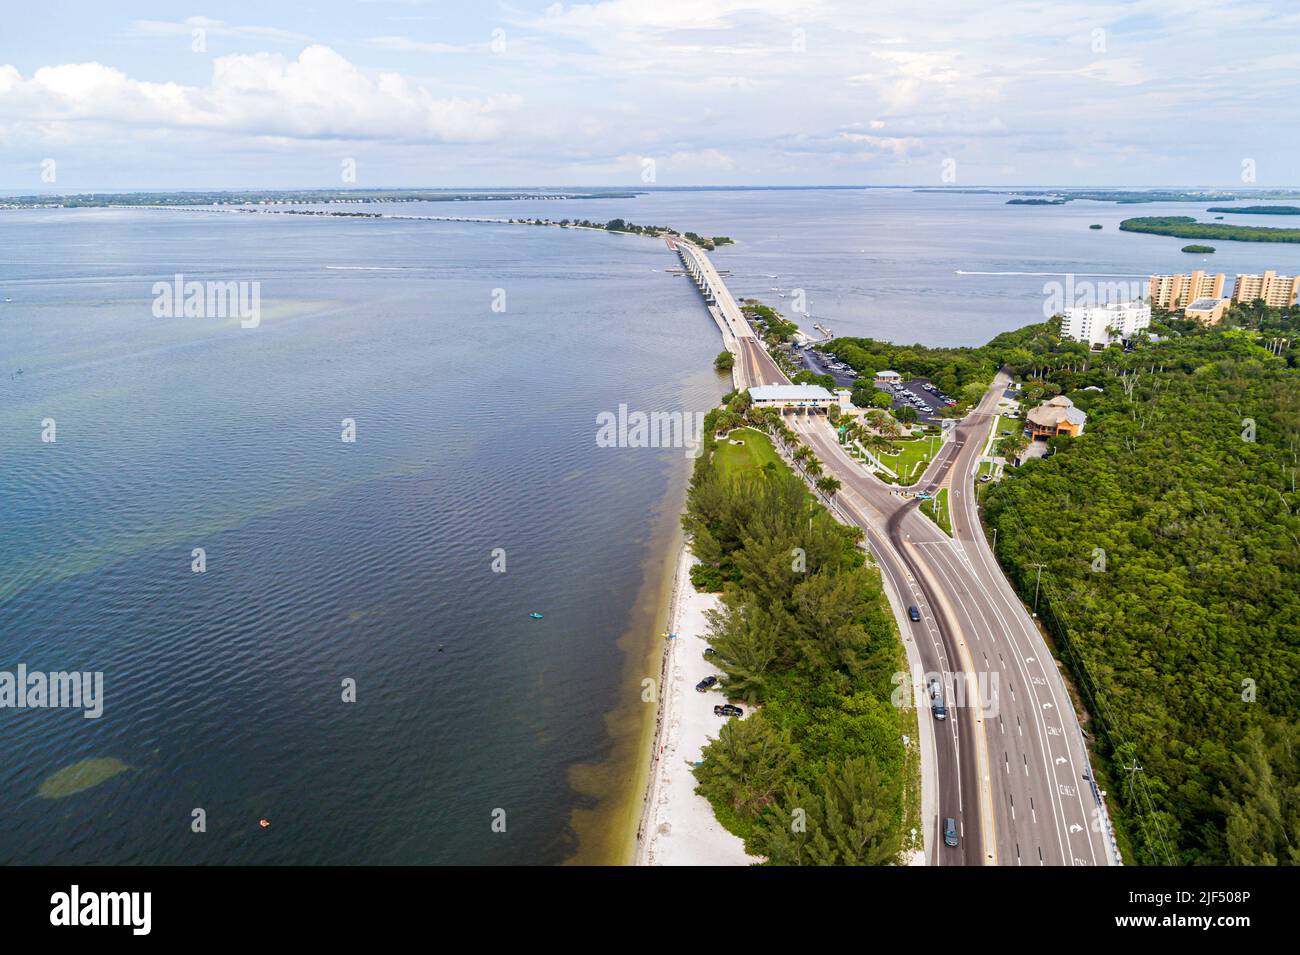 Fort Ft. Myers Florida,McGregor Boulevard Sanibel Island Causeway toll gate facility,aerial overhead view from above,natural scenery Stock Photo